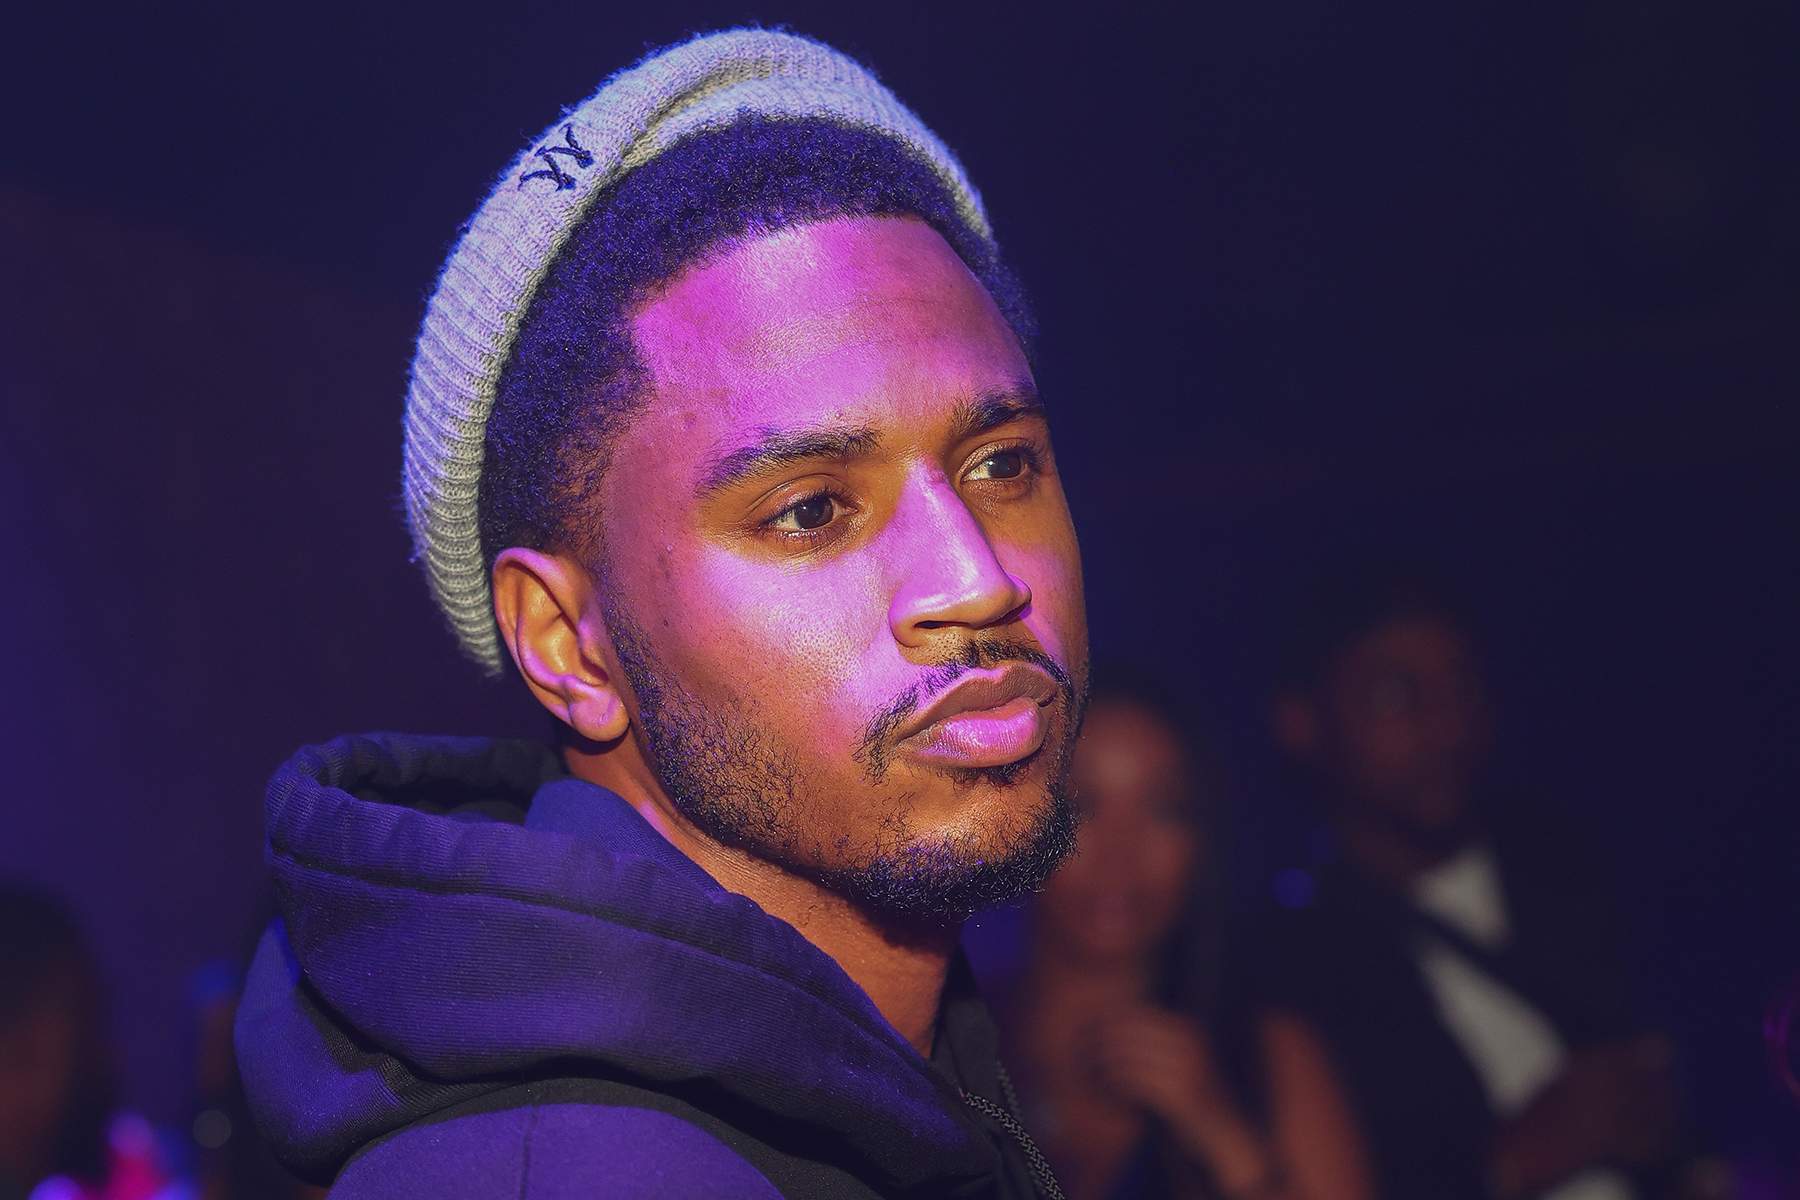 ”trey-songz-is-investigated-by-the-las-vegas-metropolitan-police-department-i”